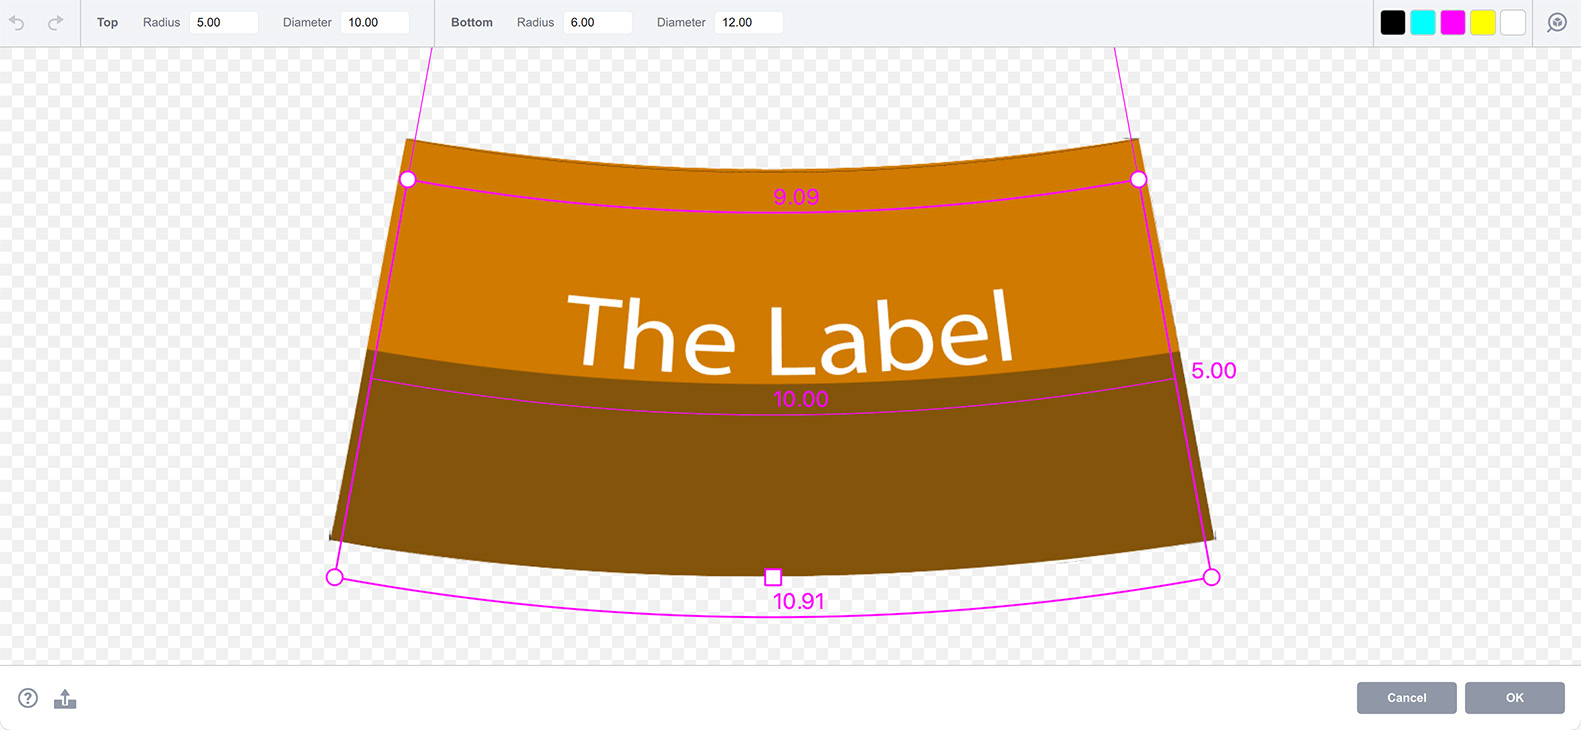 Conical label artwork loaded back to Boxshot